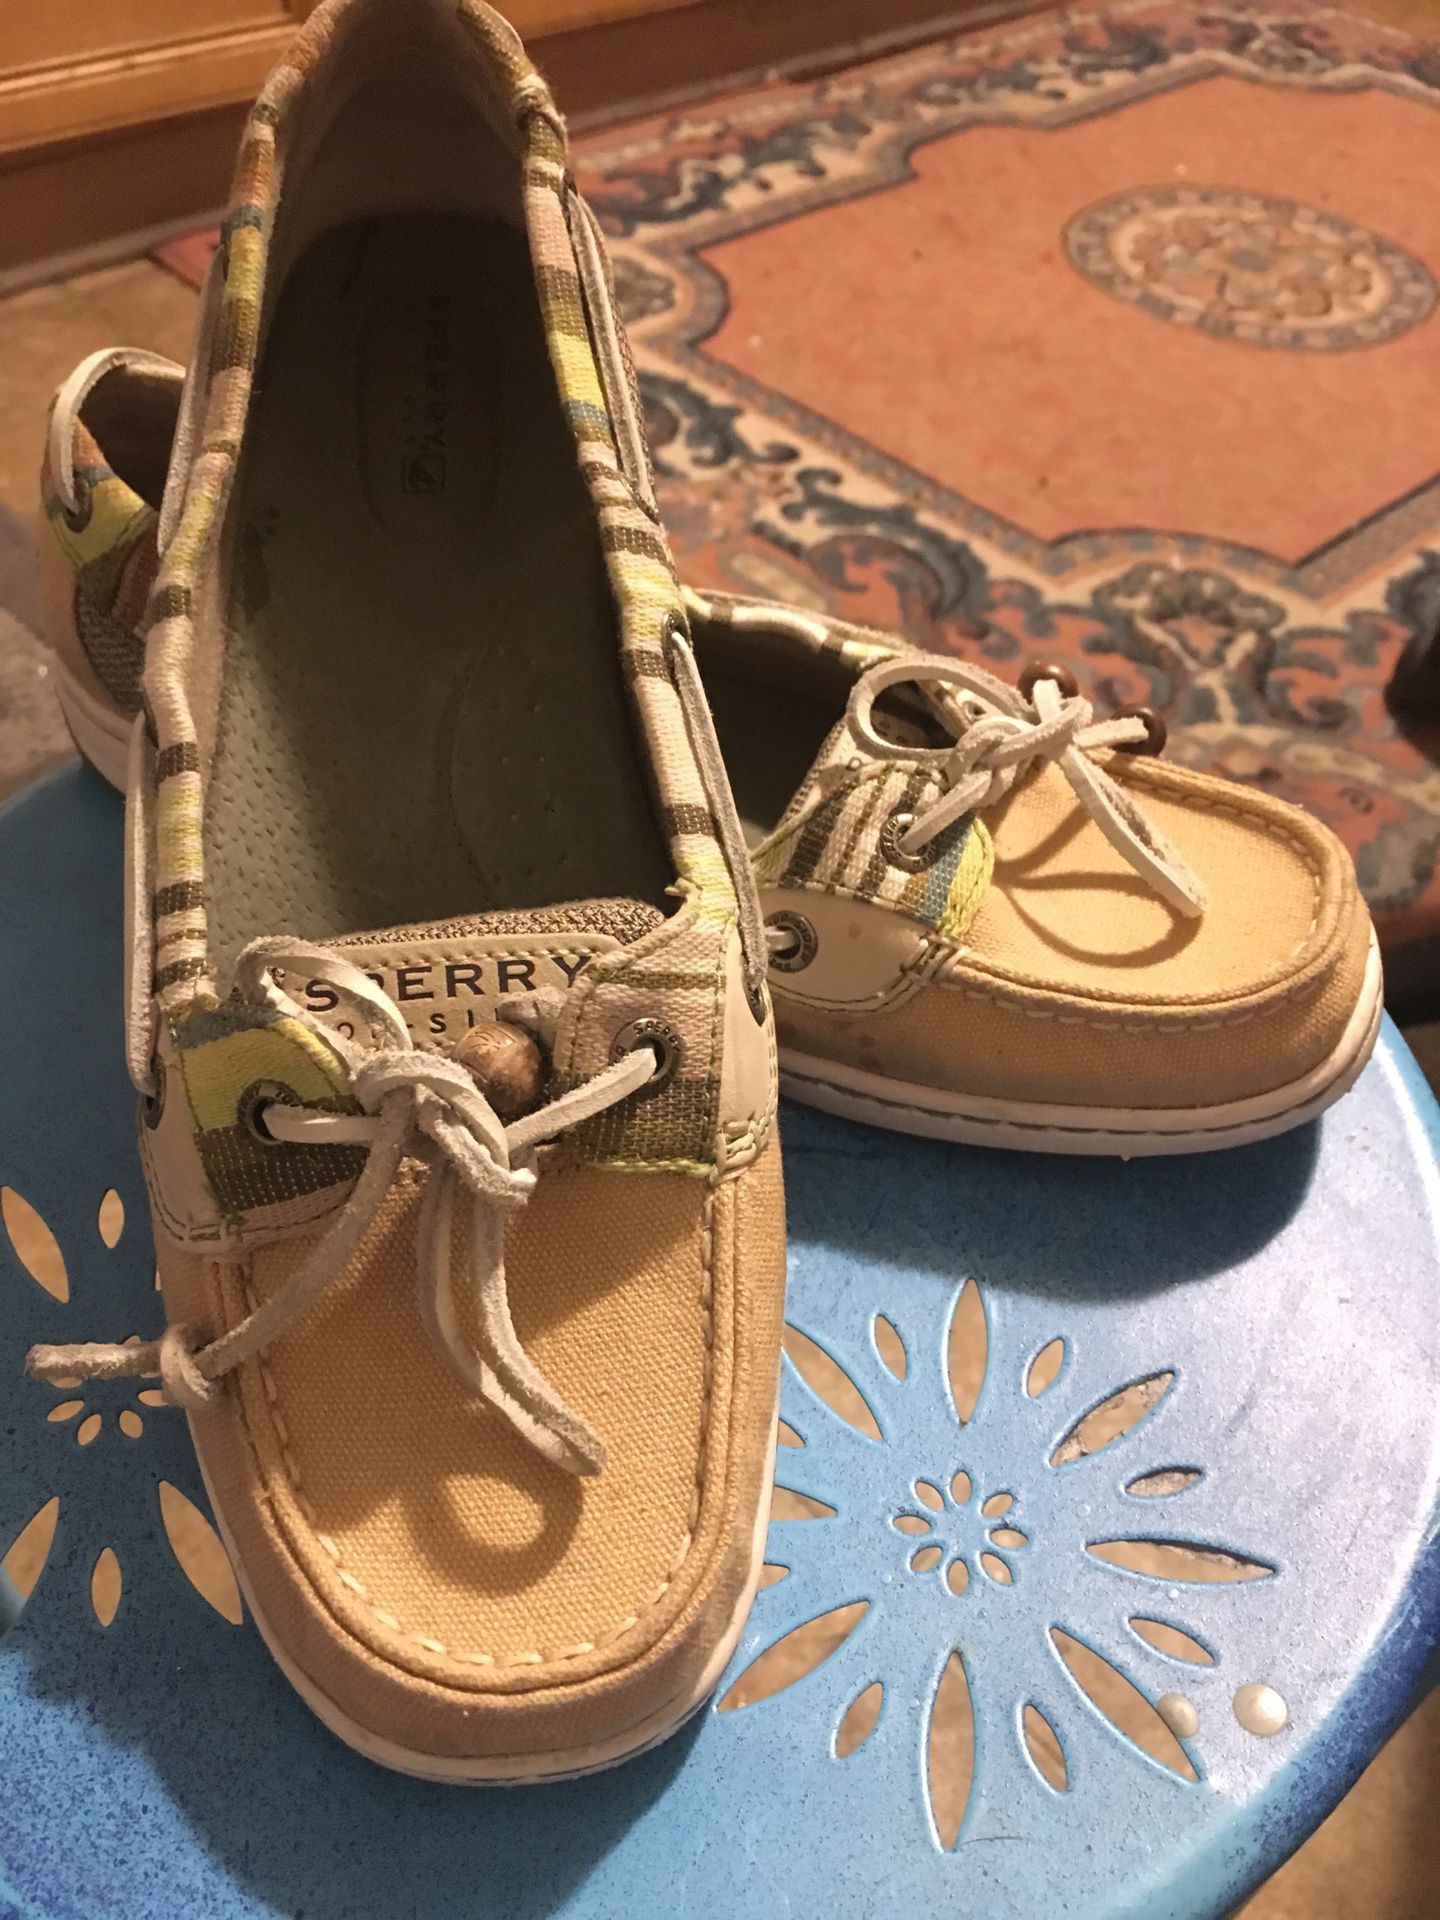 Sperry’s size 8